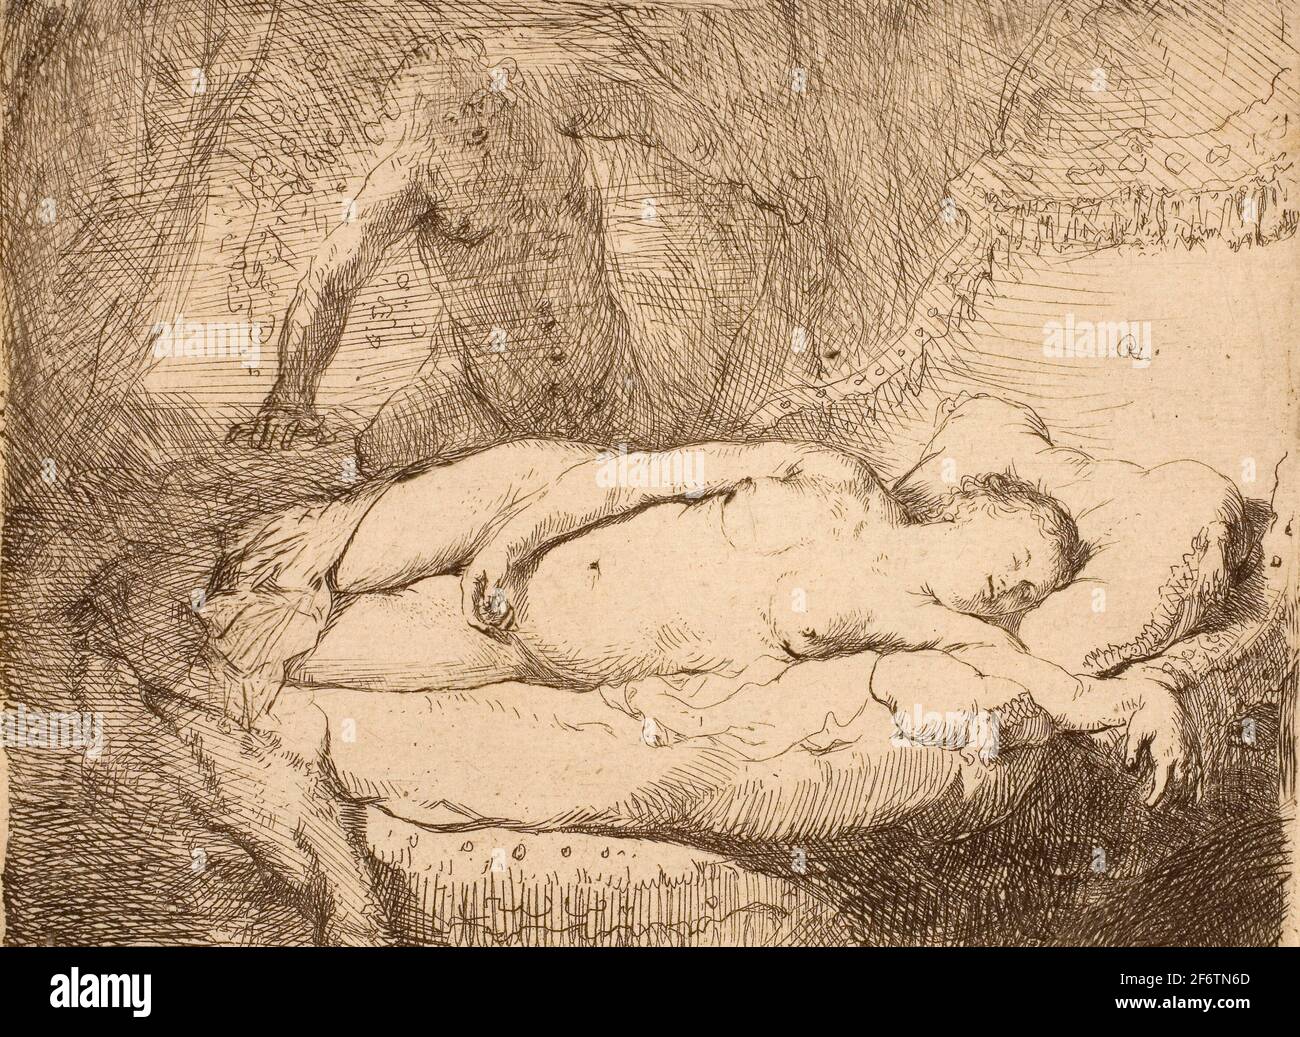 Author: Rembrandt Harmenszoon van Rijn. Jupiter and Antiope: Smaller Plate - c. 1631 - Rembrandt van Rijn Dutch, 1606-1669. Etching on buff laid Stock Photo